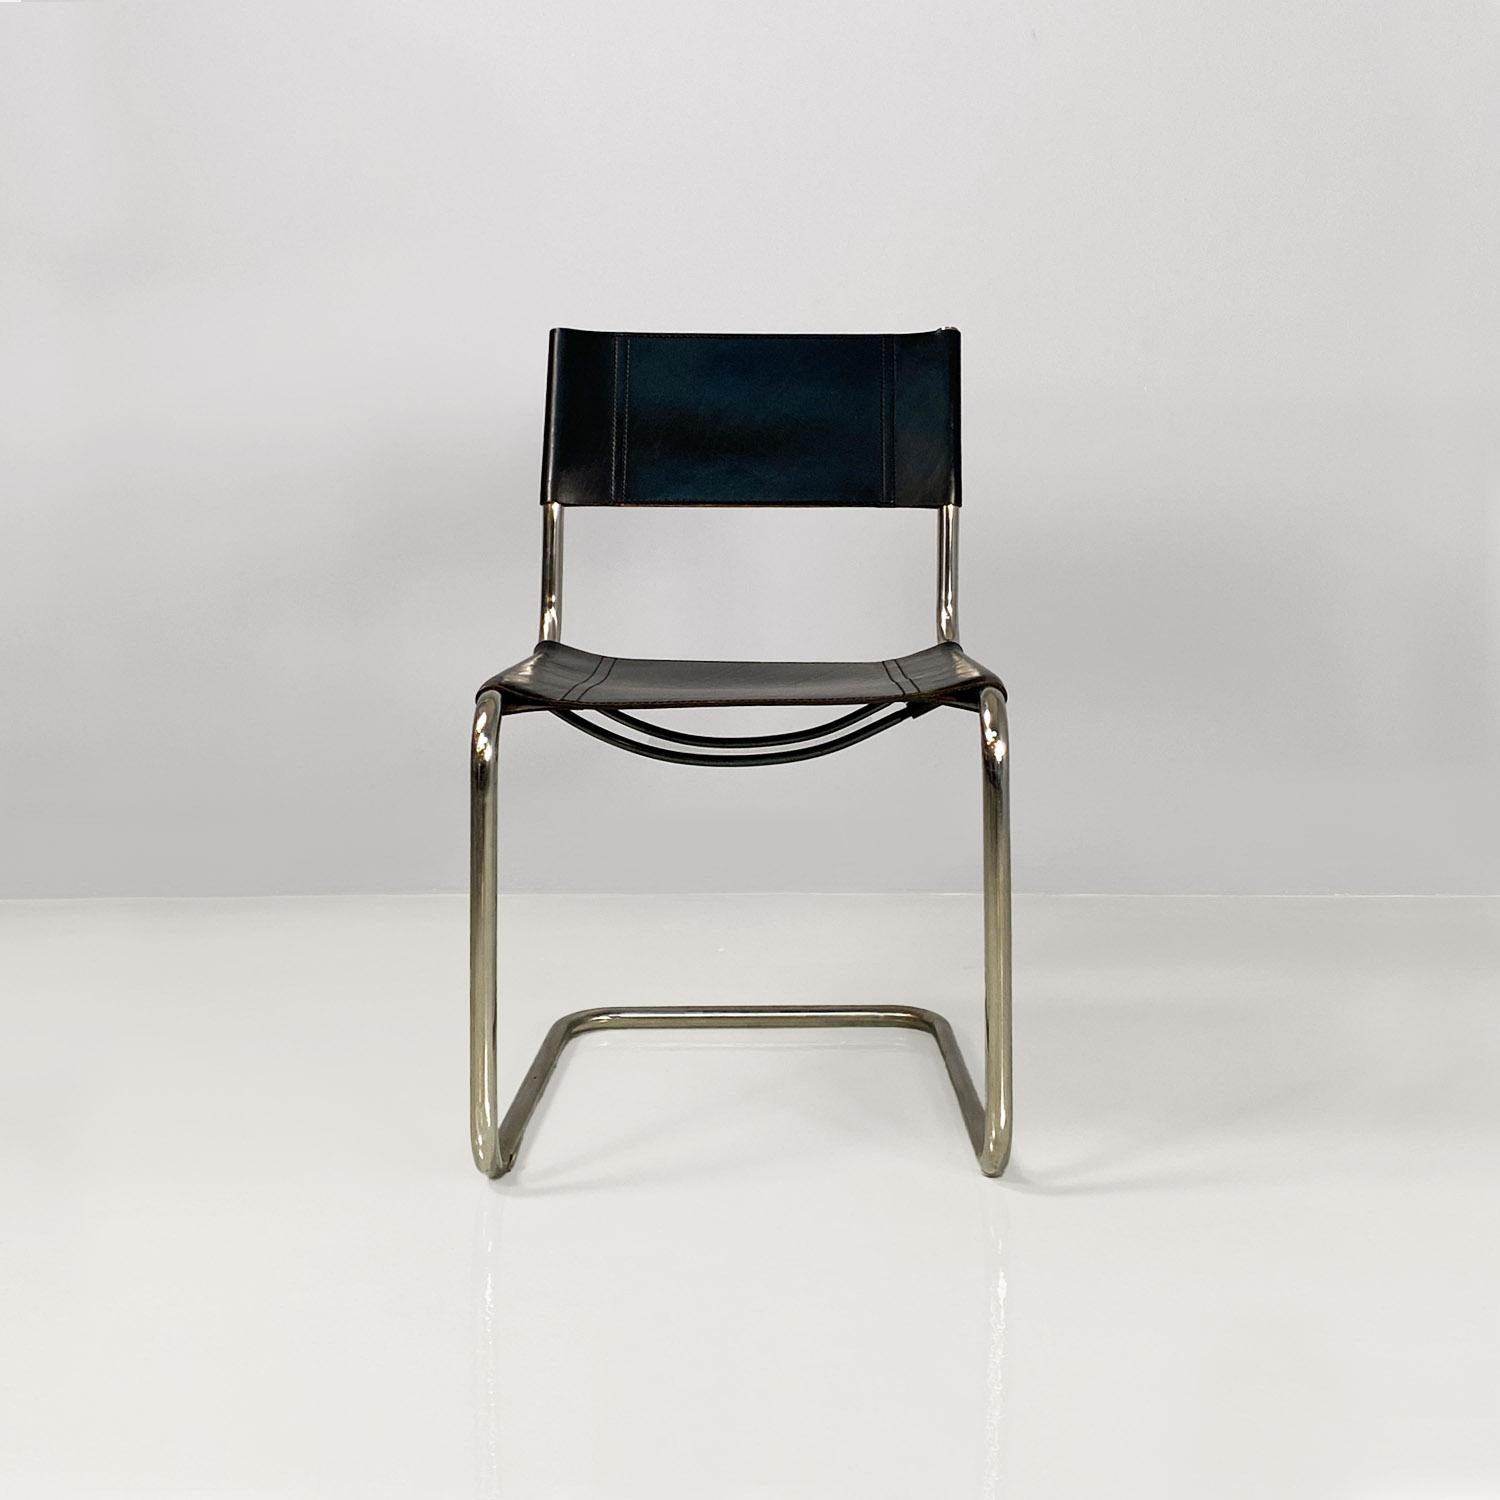 Italian modern black leather and tubolar chromed metal chairs by Zanotta, 1970s In Good Condition For Sale In MIlano, IT